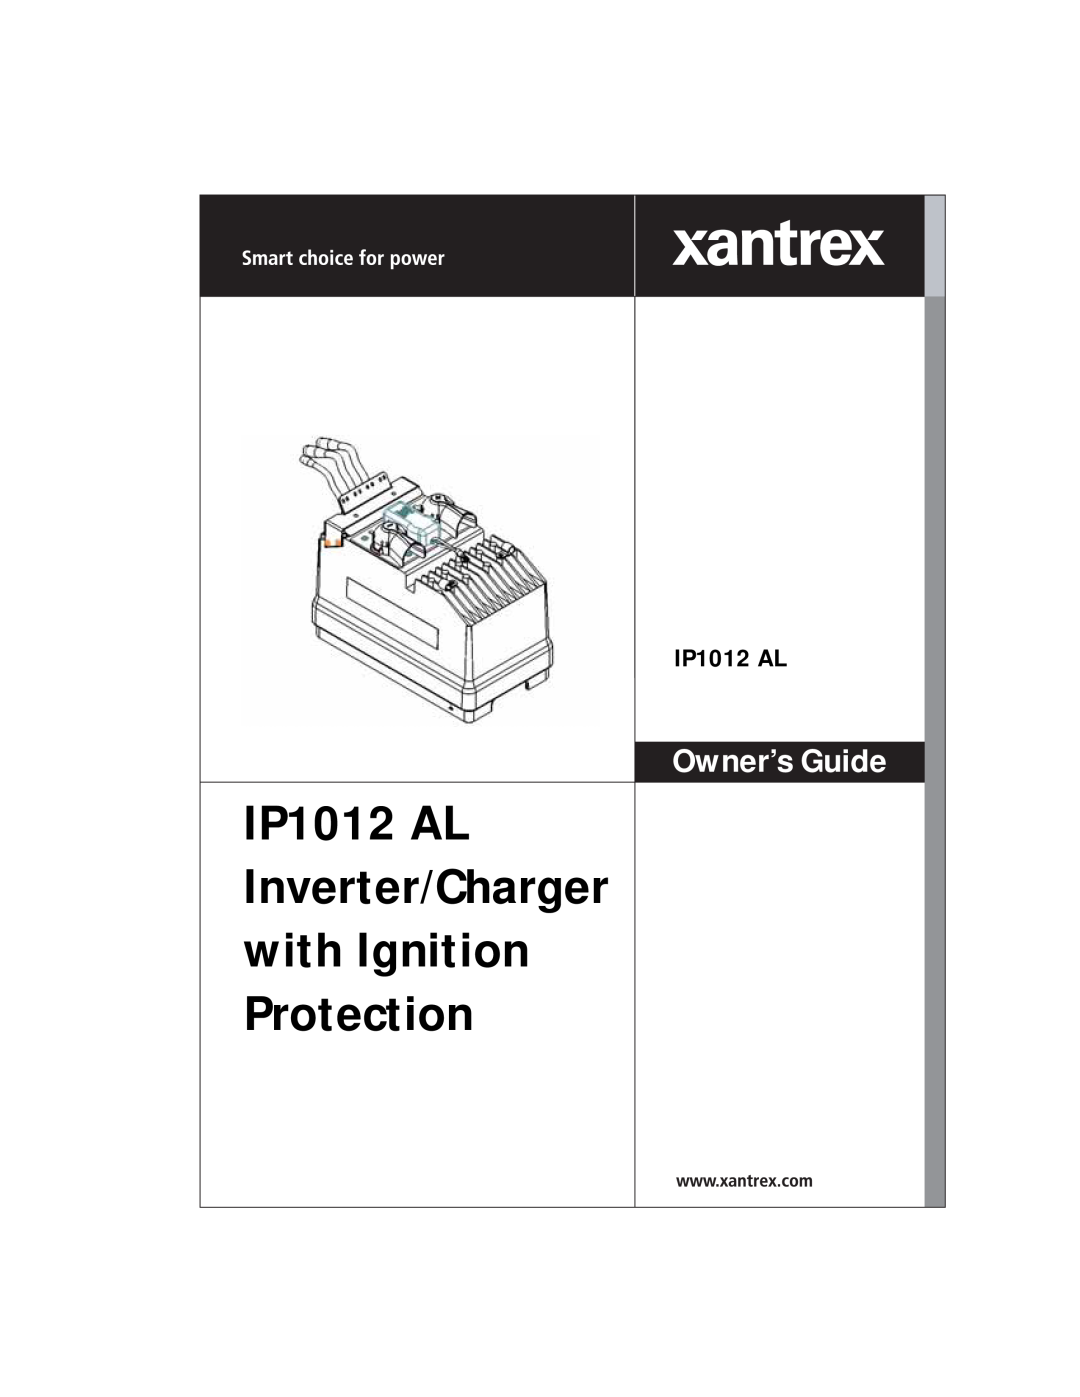 Xantrex Technology manual IP1012 AL Inverter/Charger with Ignition Protection, Owner’s Guide 